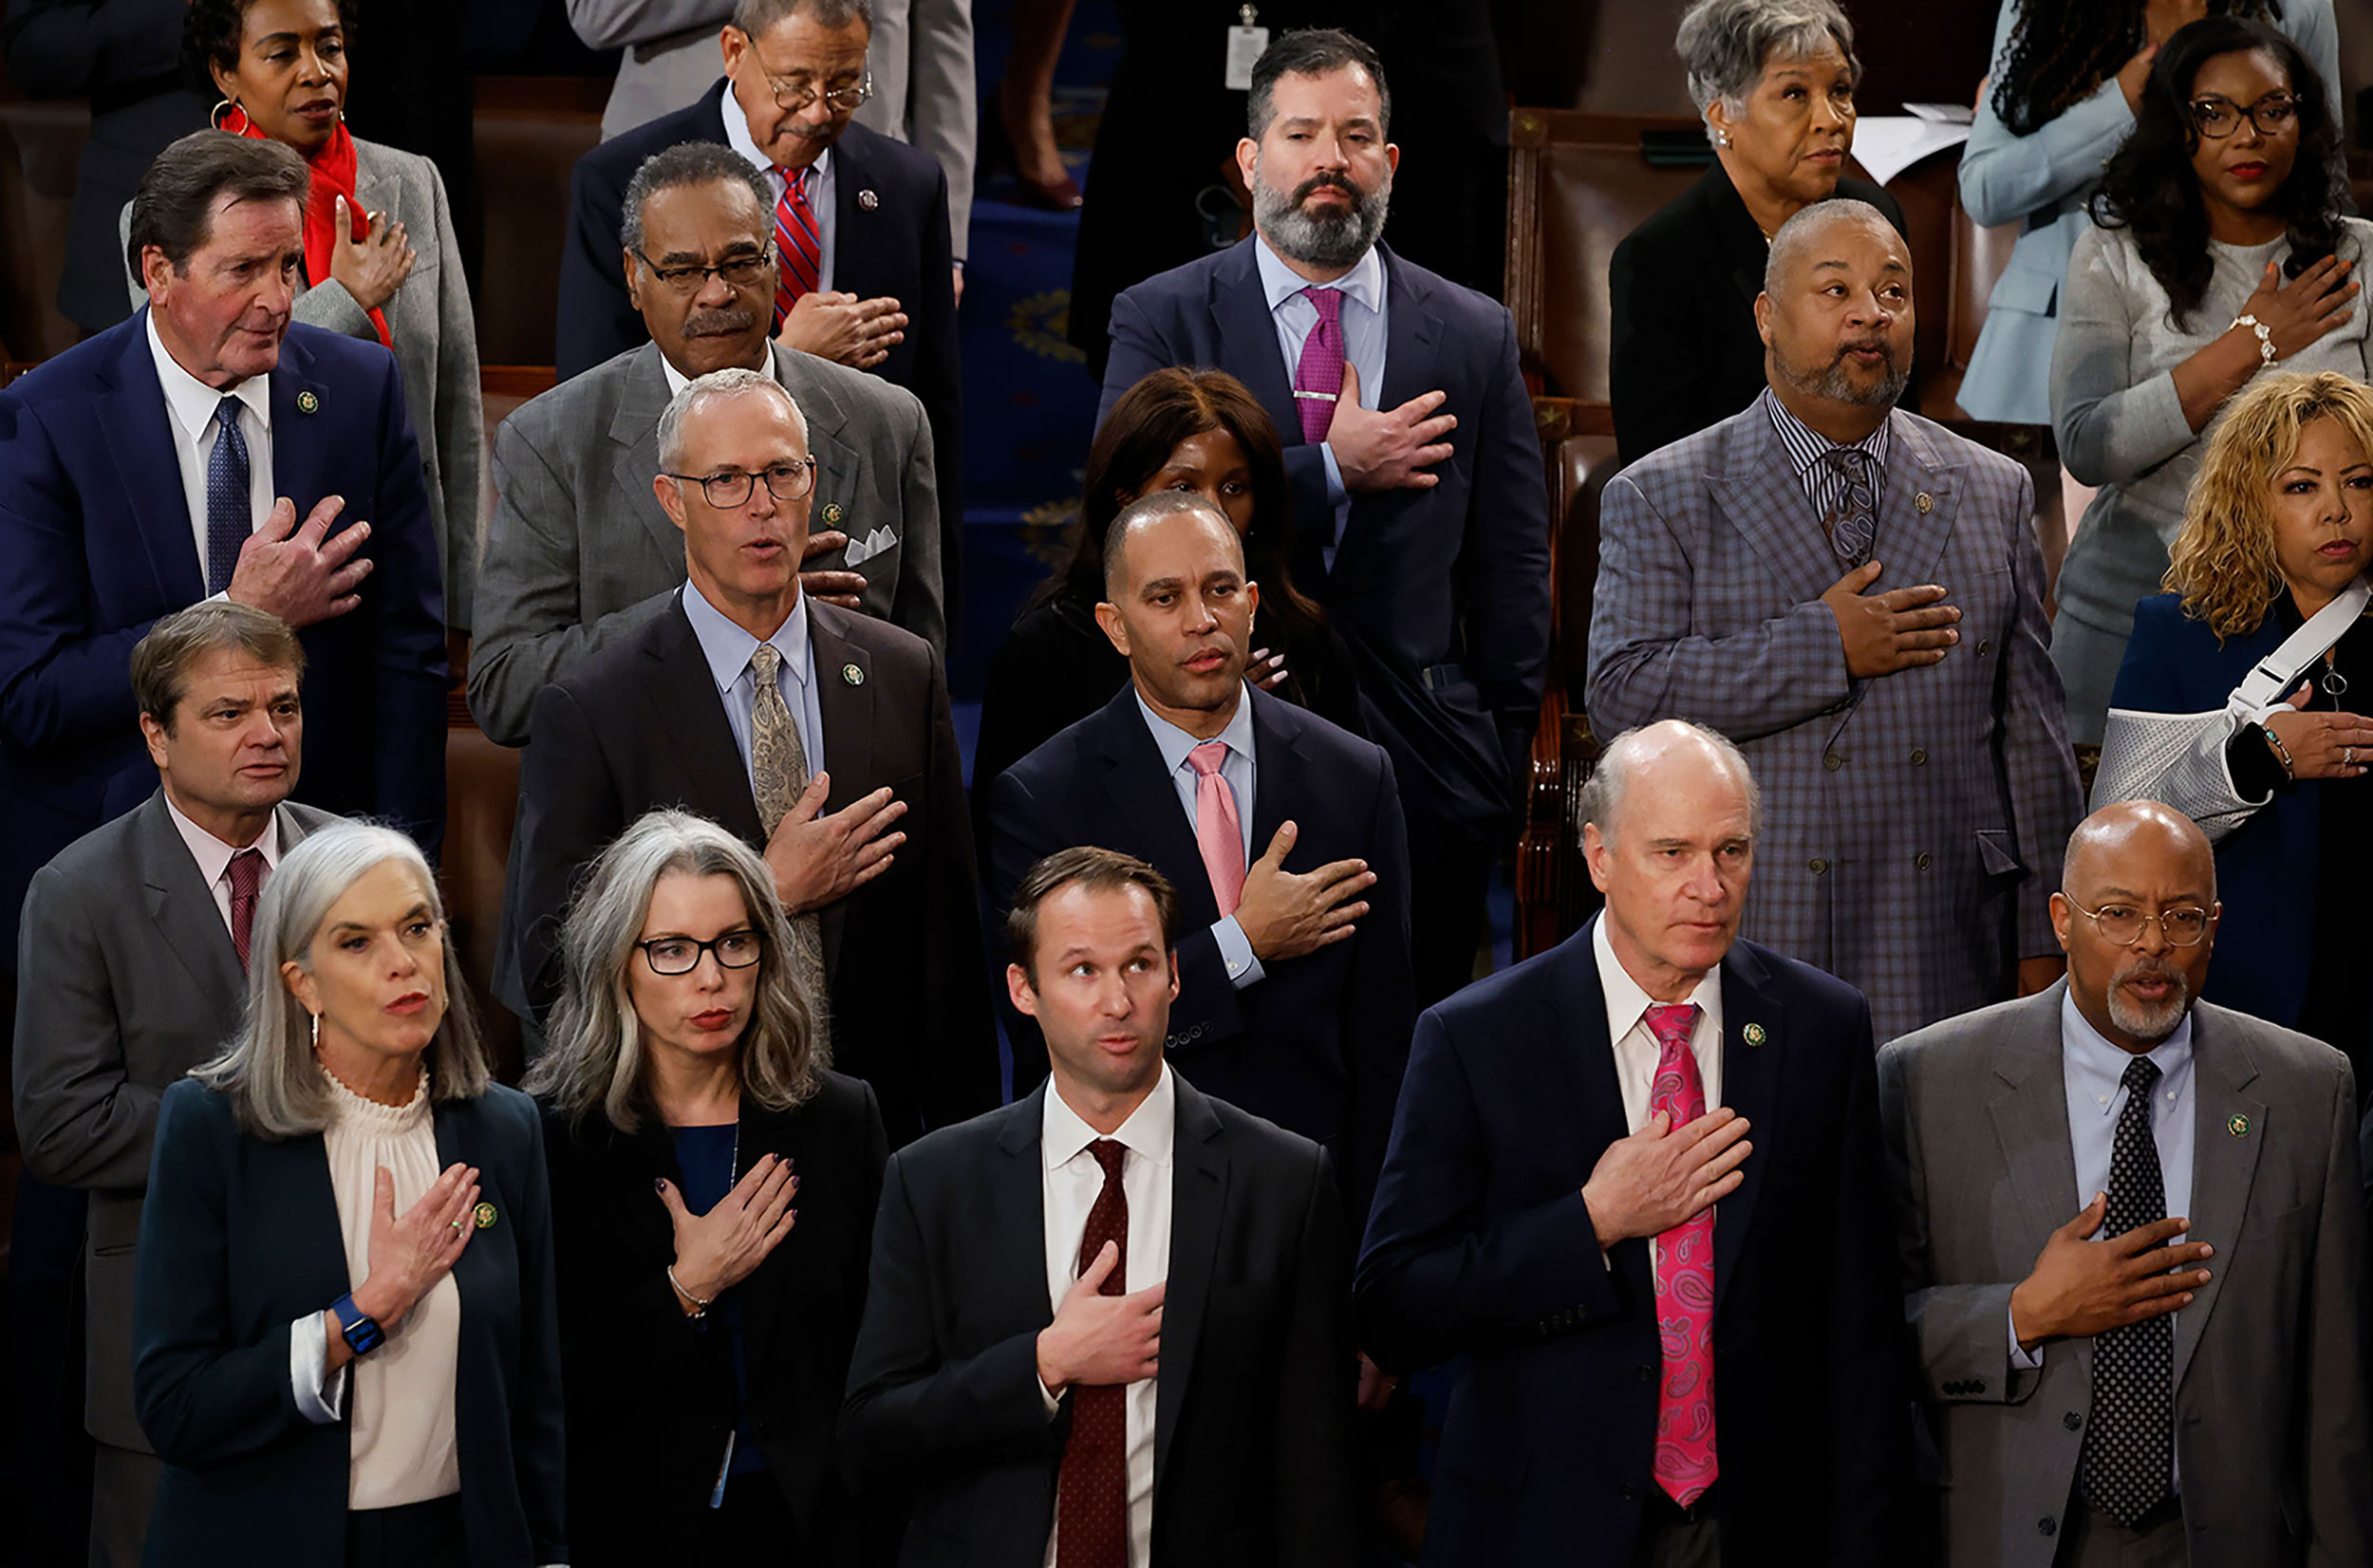 Democratic leader Hakeem Jeffries, center, and others recite the Pledge of Allegiance before the start of voting on Thursday.